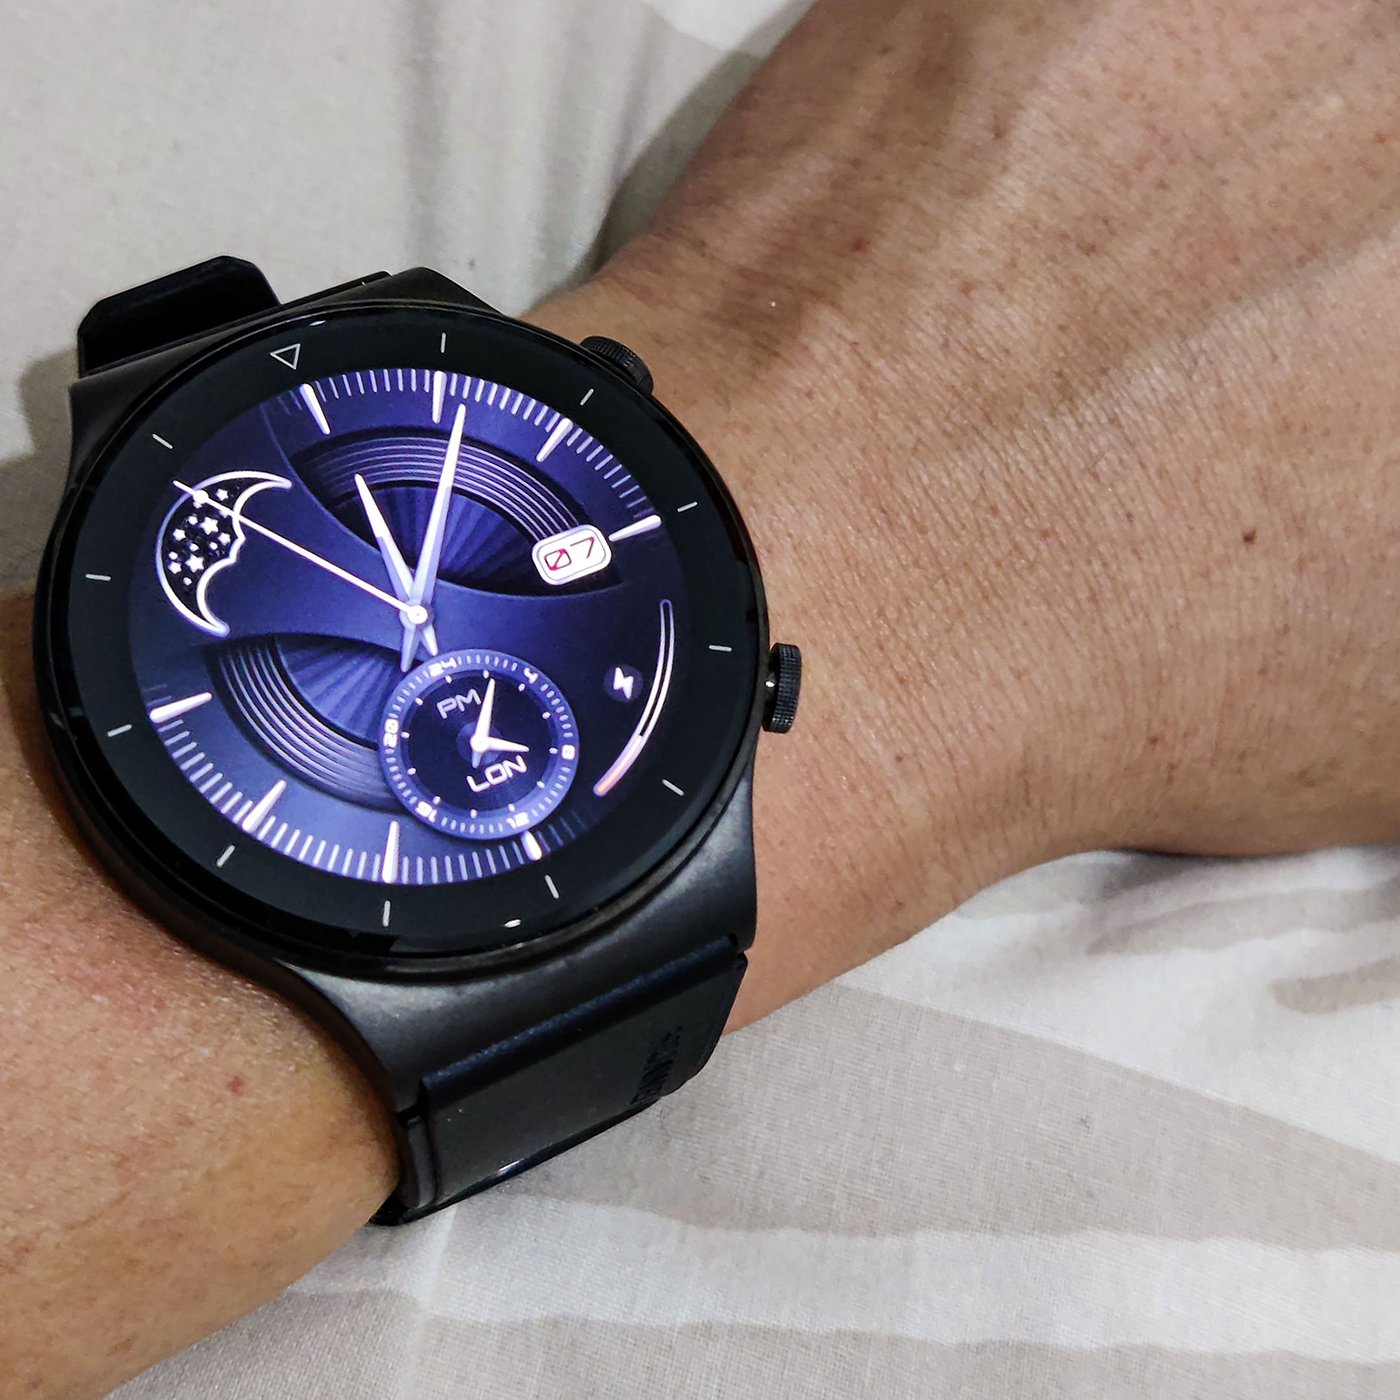 Huawei Watch GT2 Pro review: a handsome, gender-neutral watch 